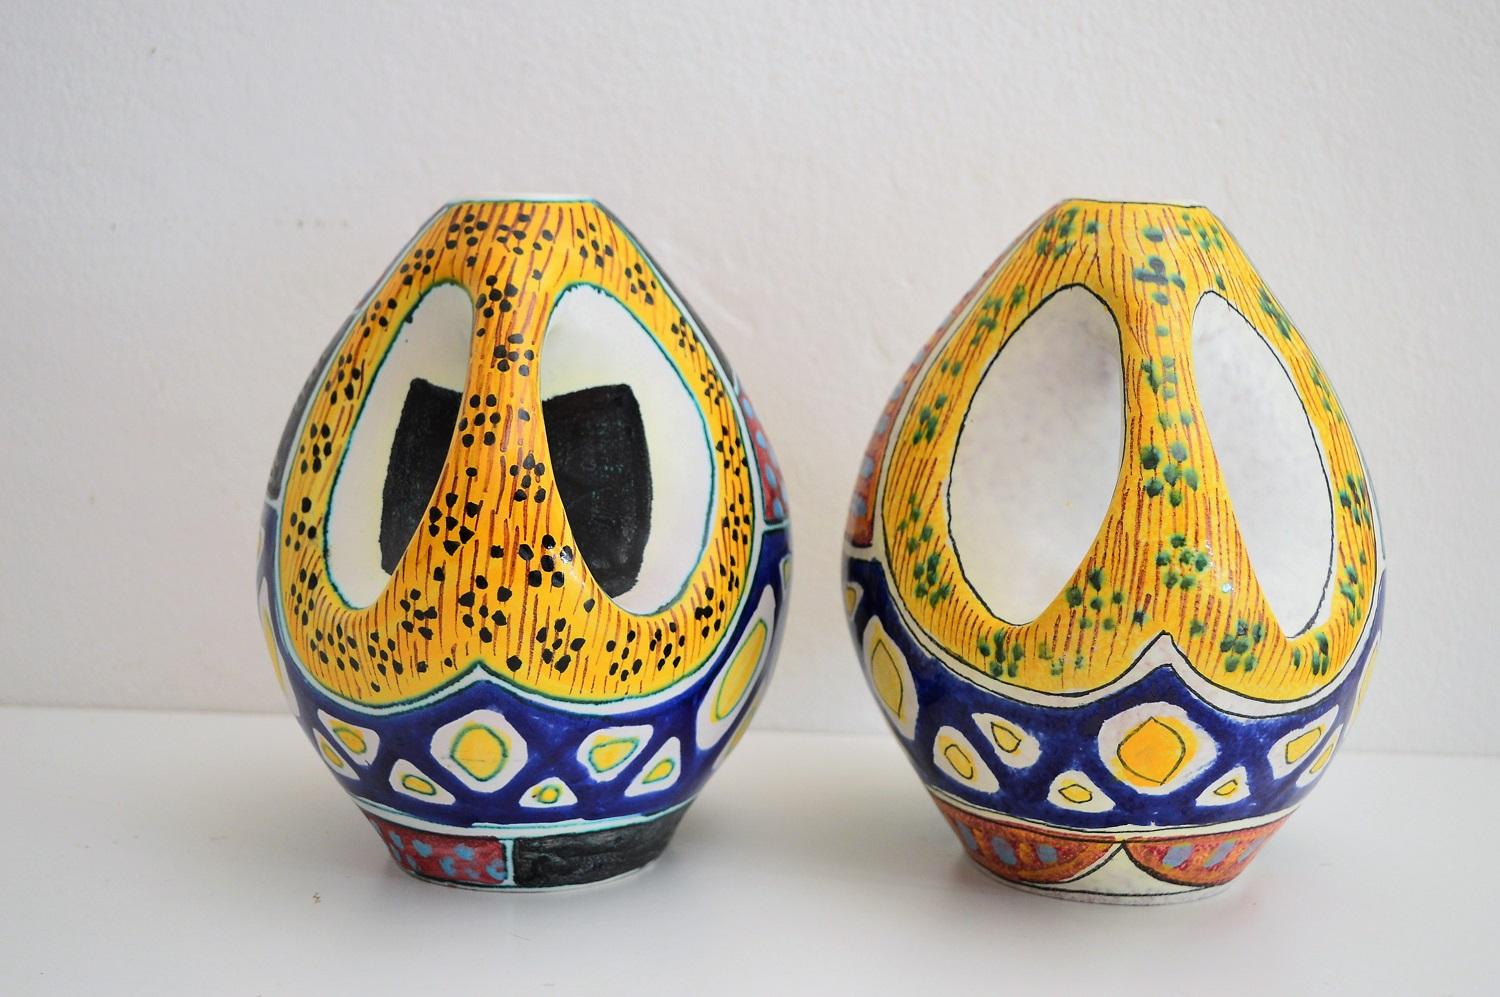 Mid-Century Modern Italian Midcentury Ceramic Vases from Valceresio, 1950s, Set of Two For Sale